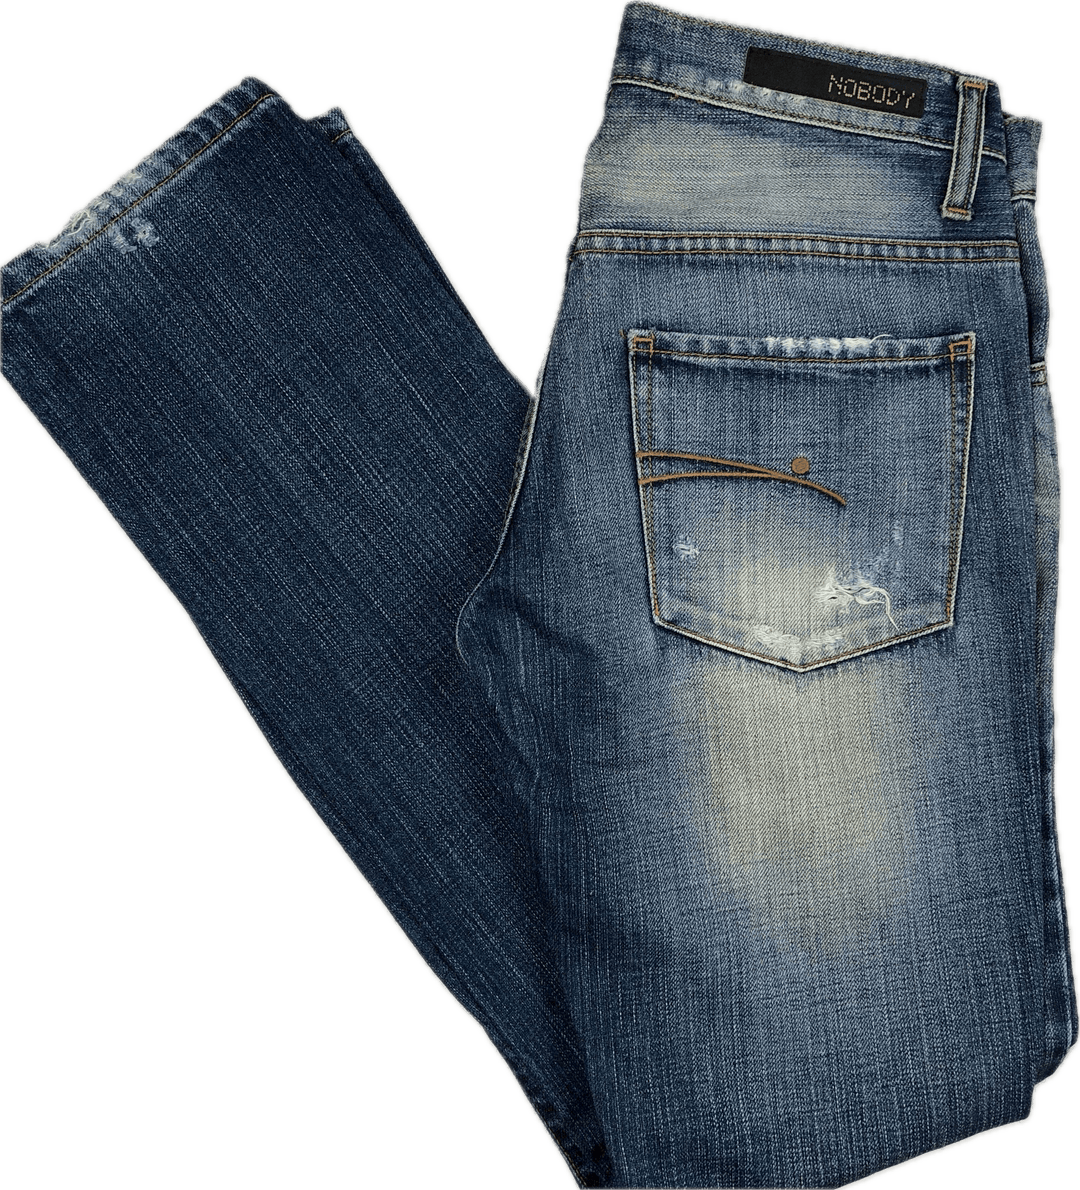 NOBODY Distressed Ripped Jeans- Size 25 - Jean Pool